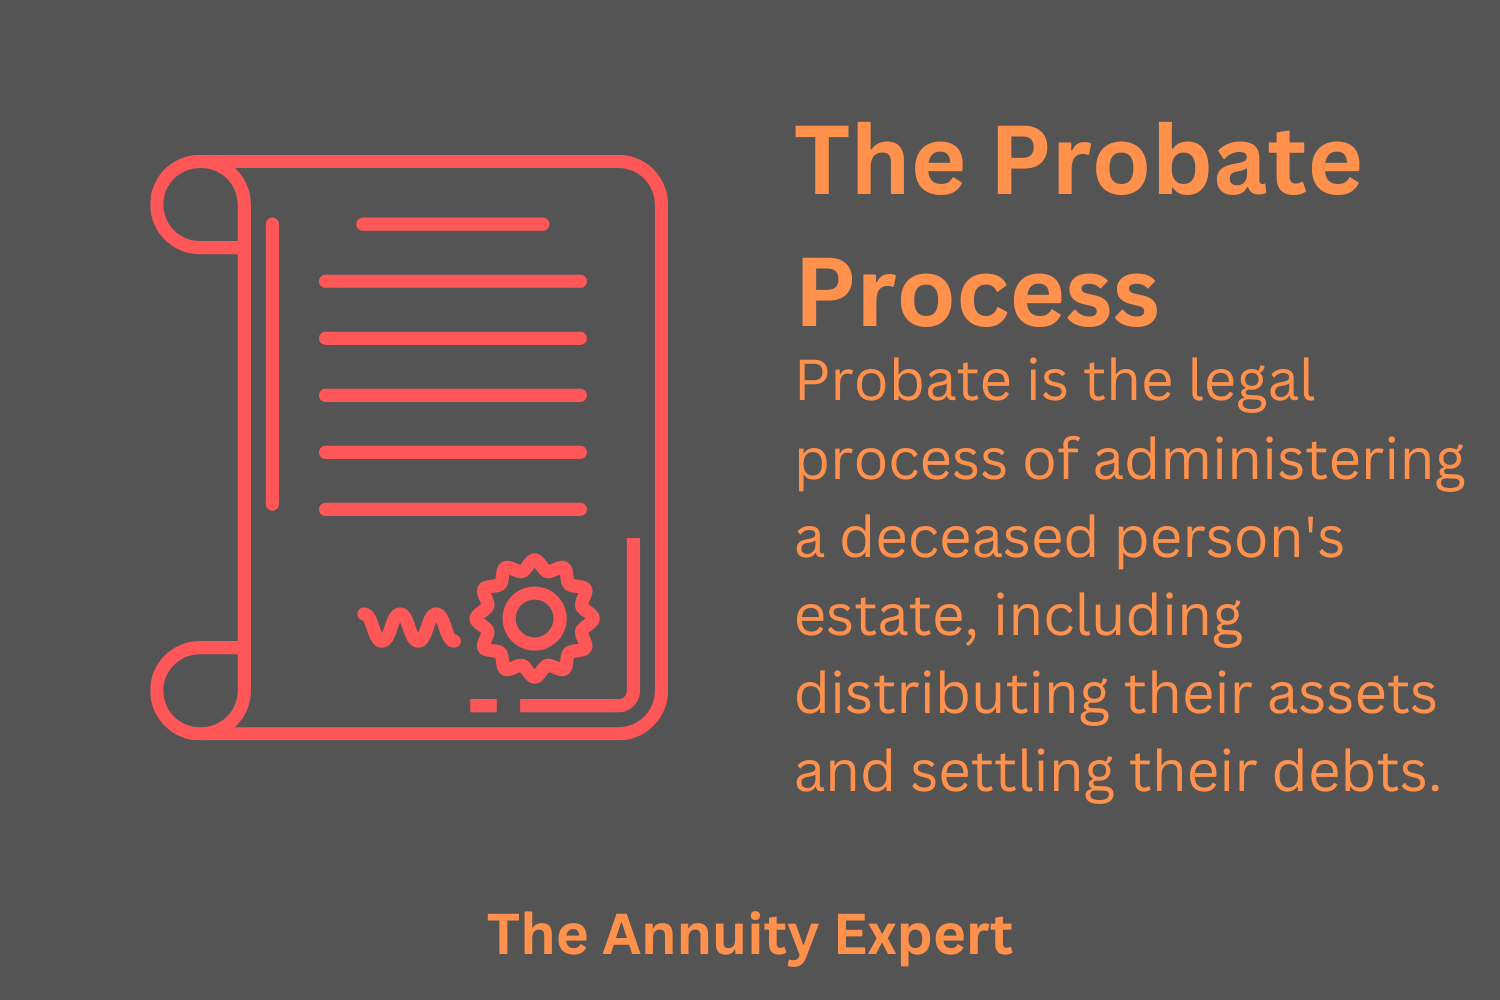 What Is The Probate Process?